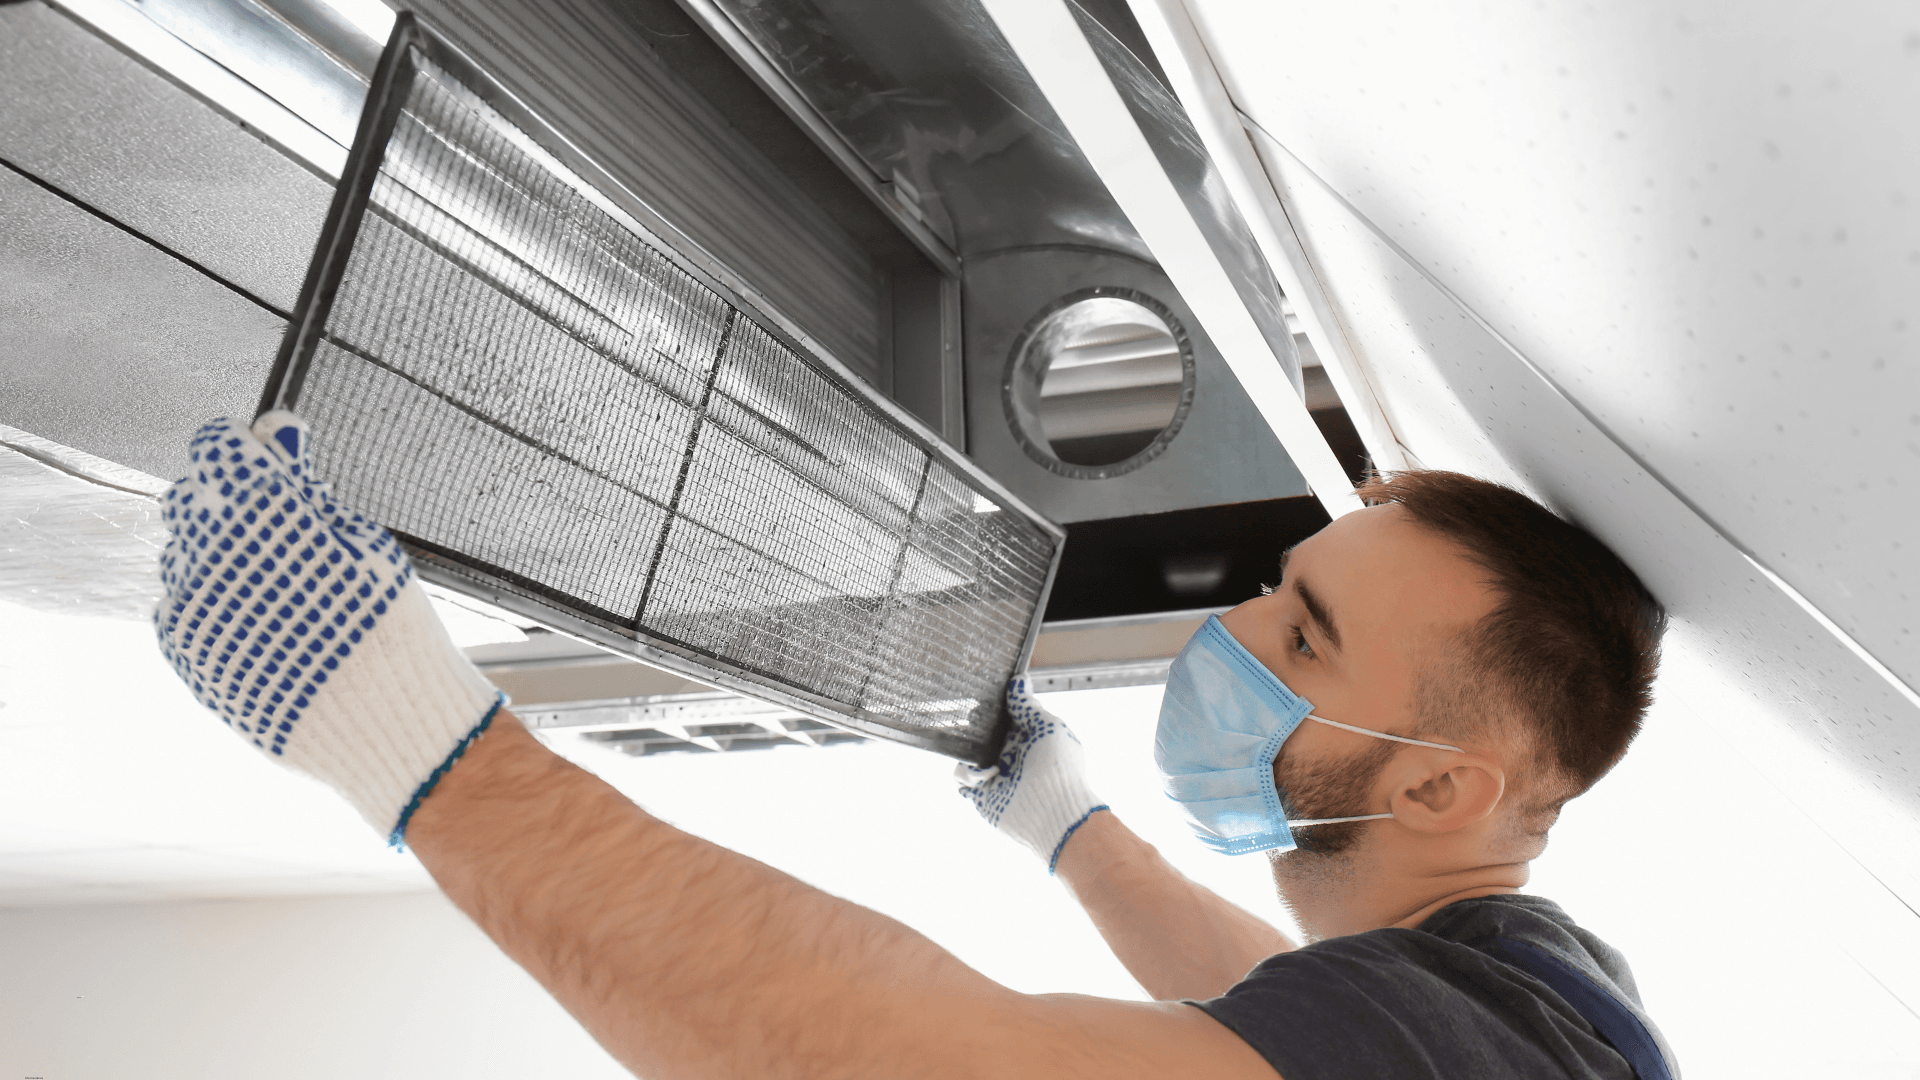 Man installing a new HVAC filter with a mask on